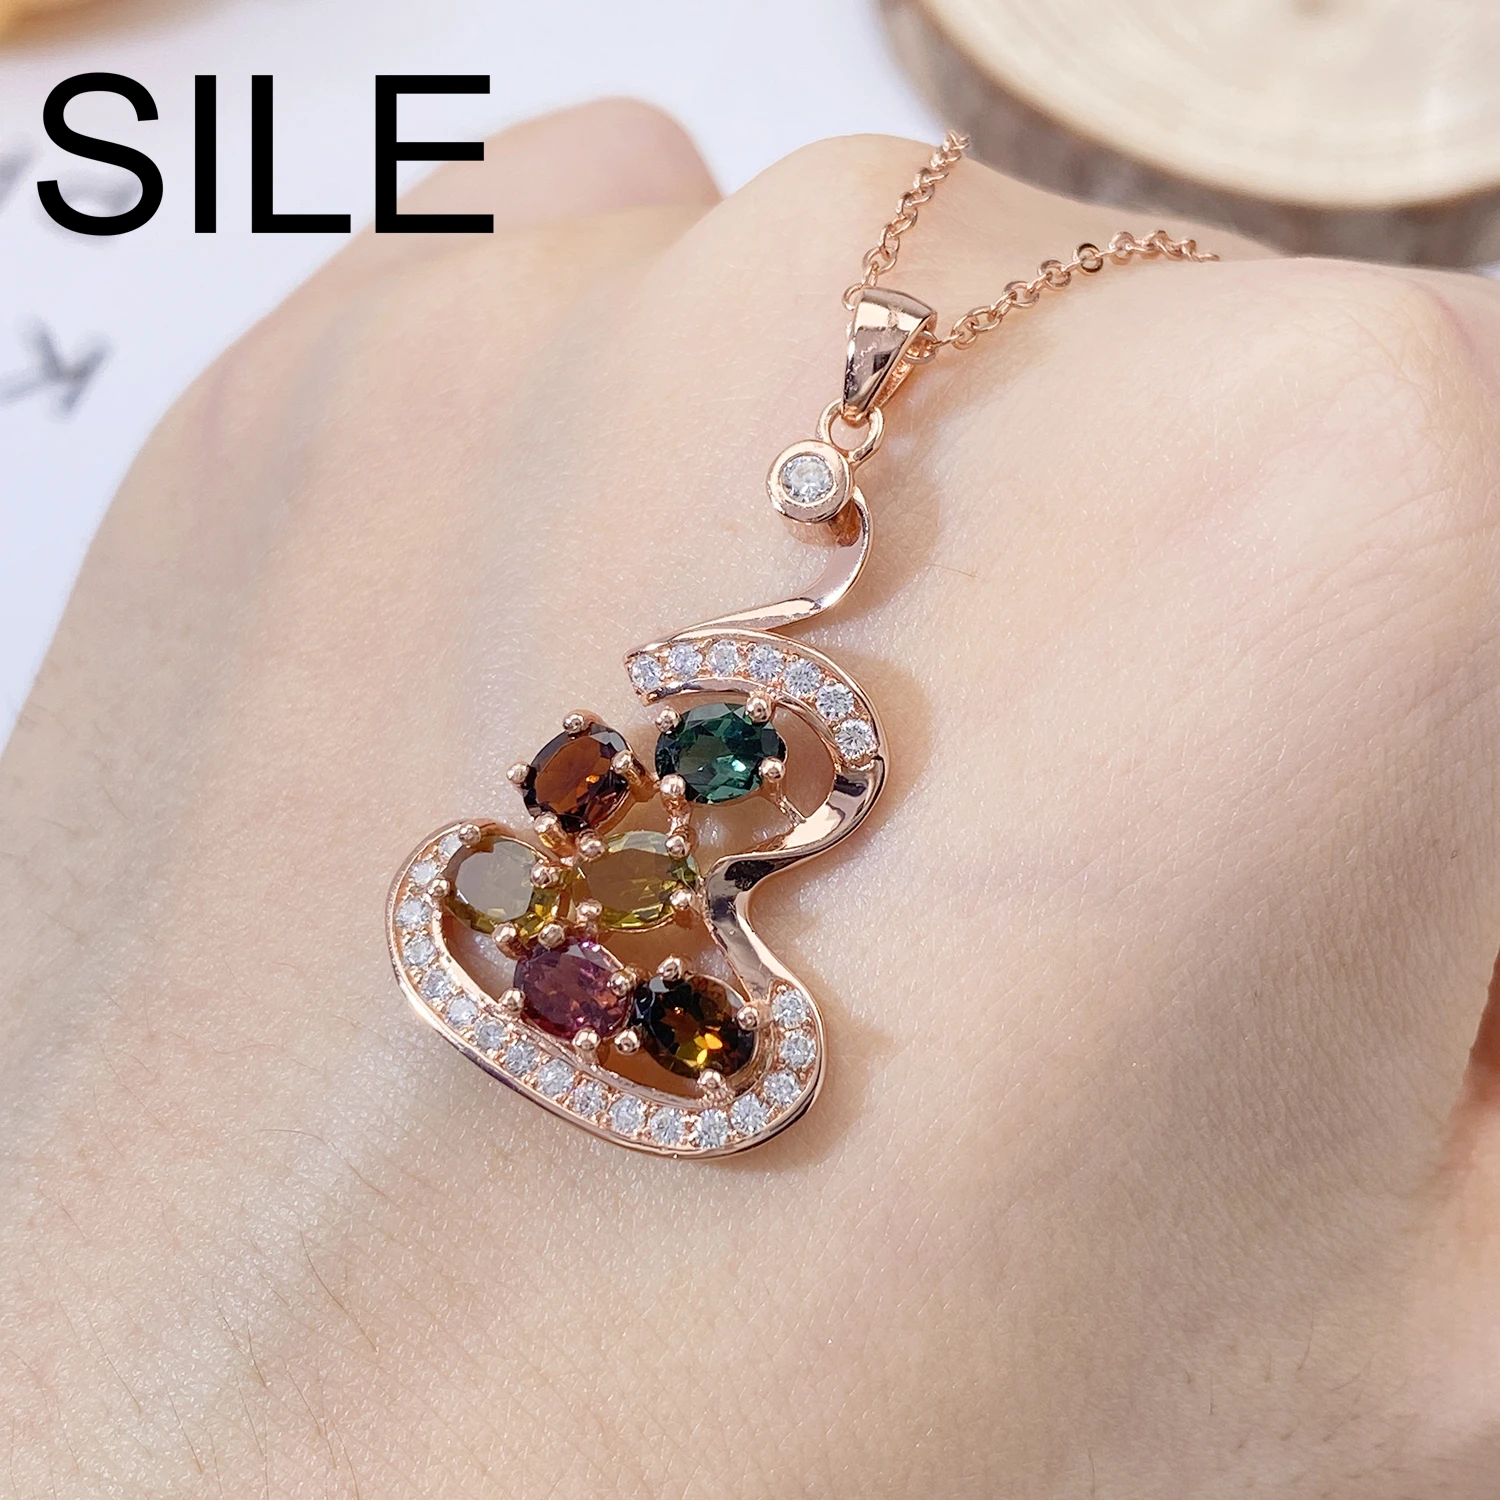 

SILE 18K Rose Gold Plated 925 Sterling Silver Natural Colors Tourmaline Gourd Pendant Necklaces Luxury Gemstone Clavicle Chain